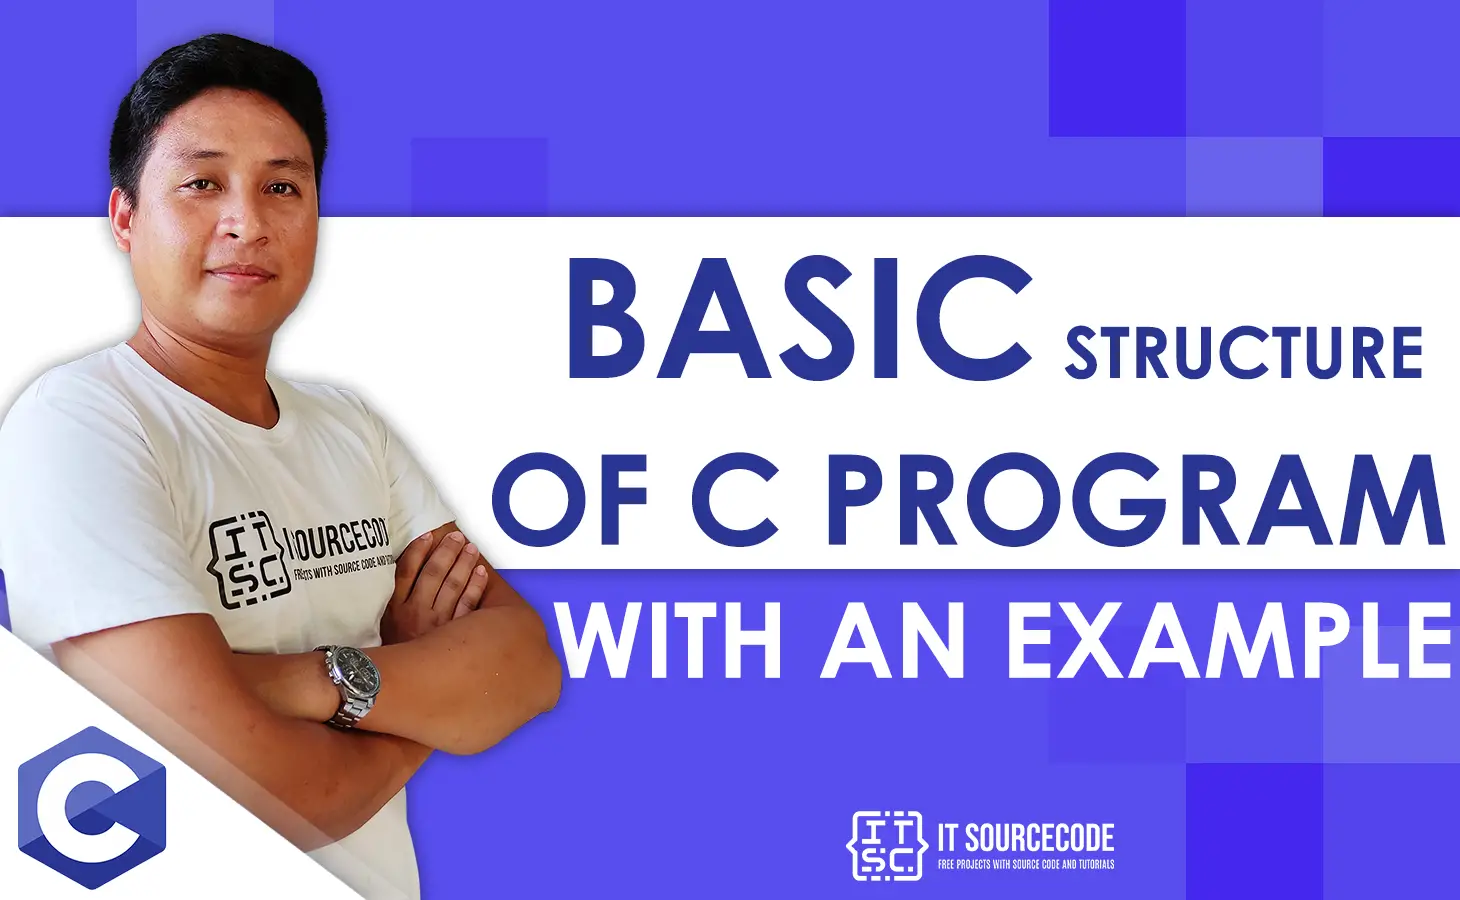 Basic Structure of C Program with an Example